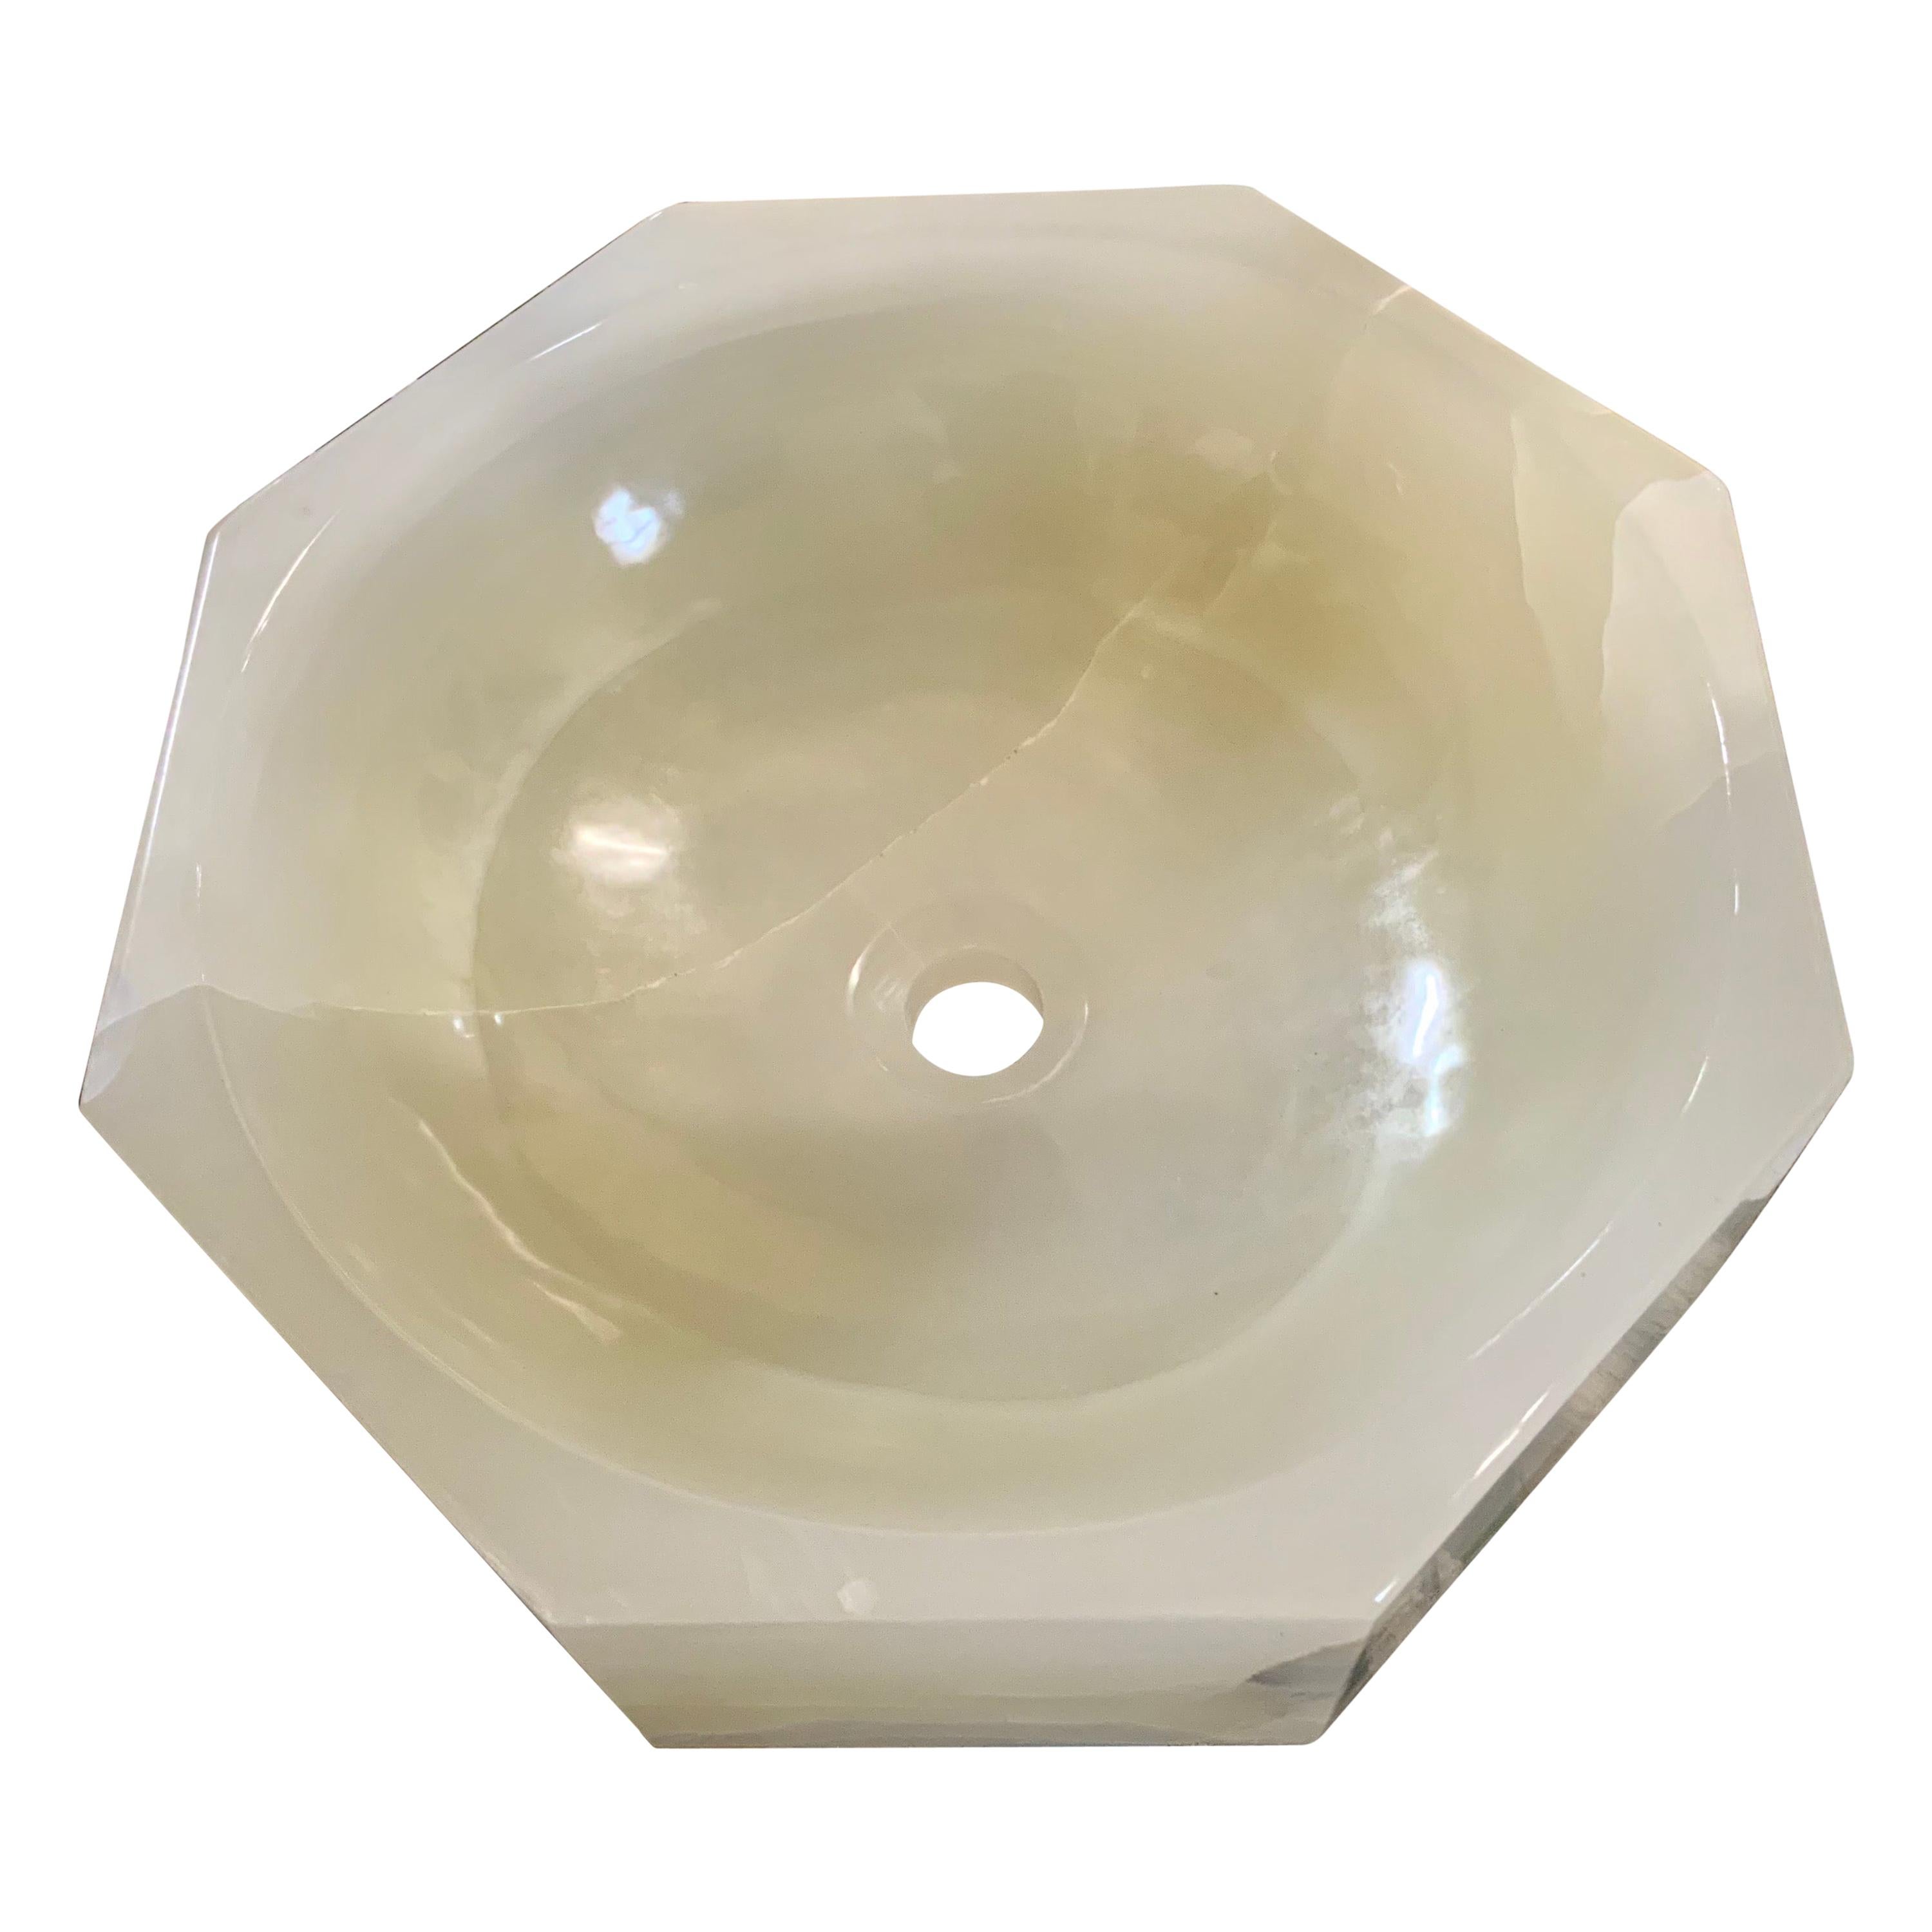 This green onyx sink origins from South America.

Contemporary manufacture.